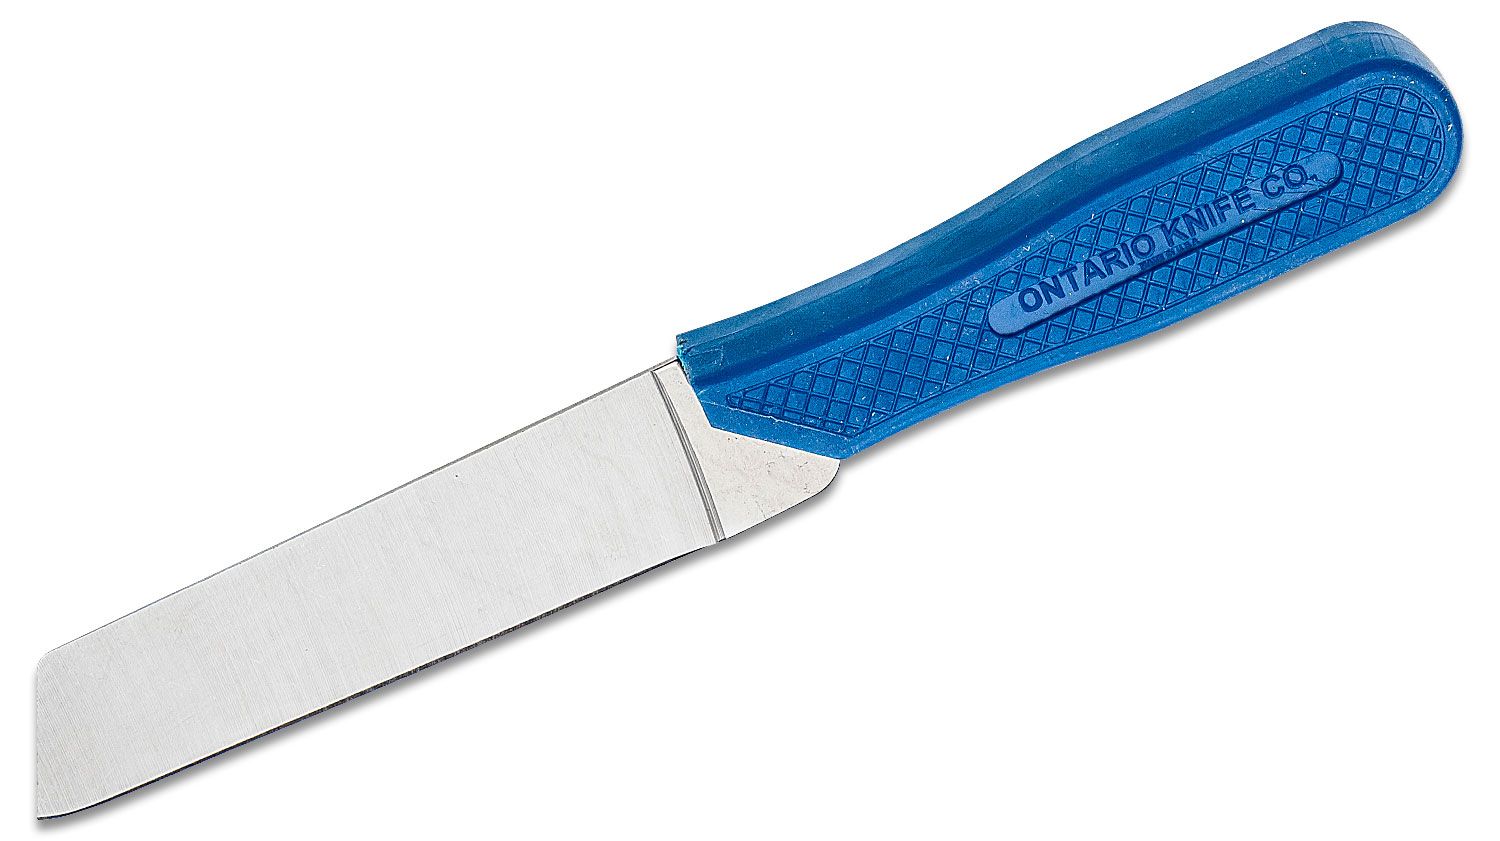 Ontario Seed Potato Field Knife 3.75 Stainless Steel Blade, Blue Plastic  Handle - KnifeCenter - 5125SS - Discontinued